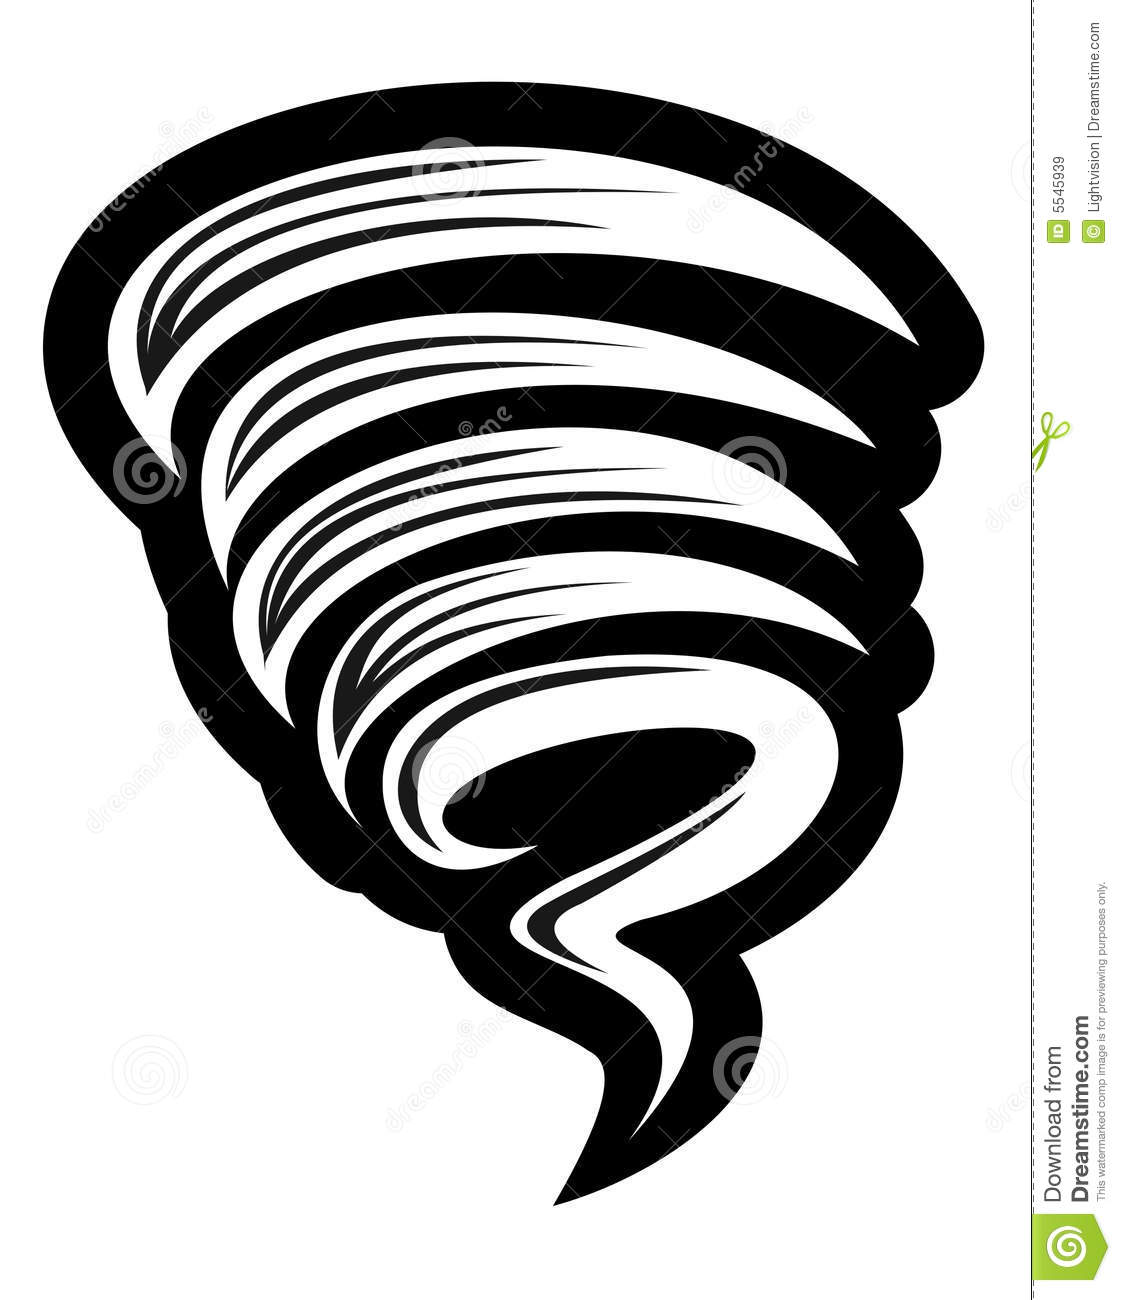 Illustration Of A Tornado In Black And White Isolated On A White